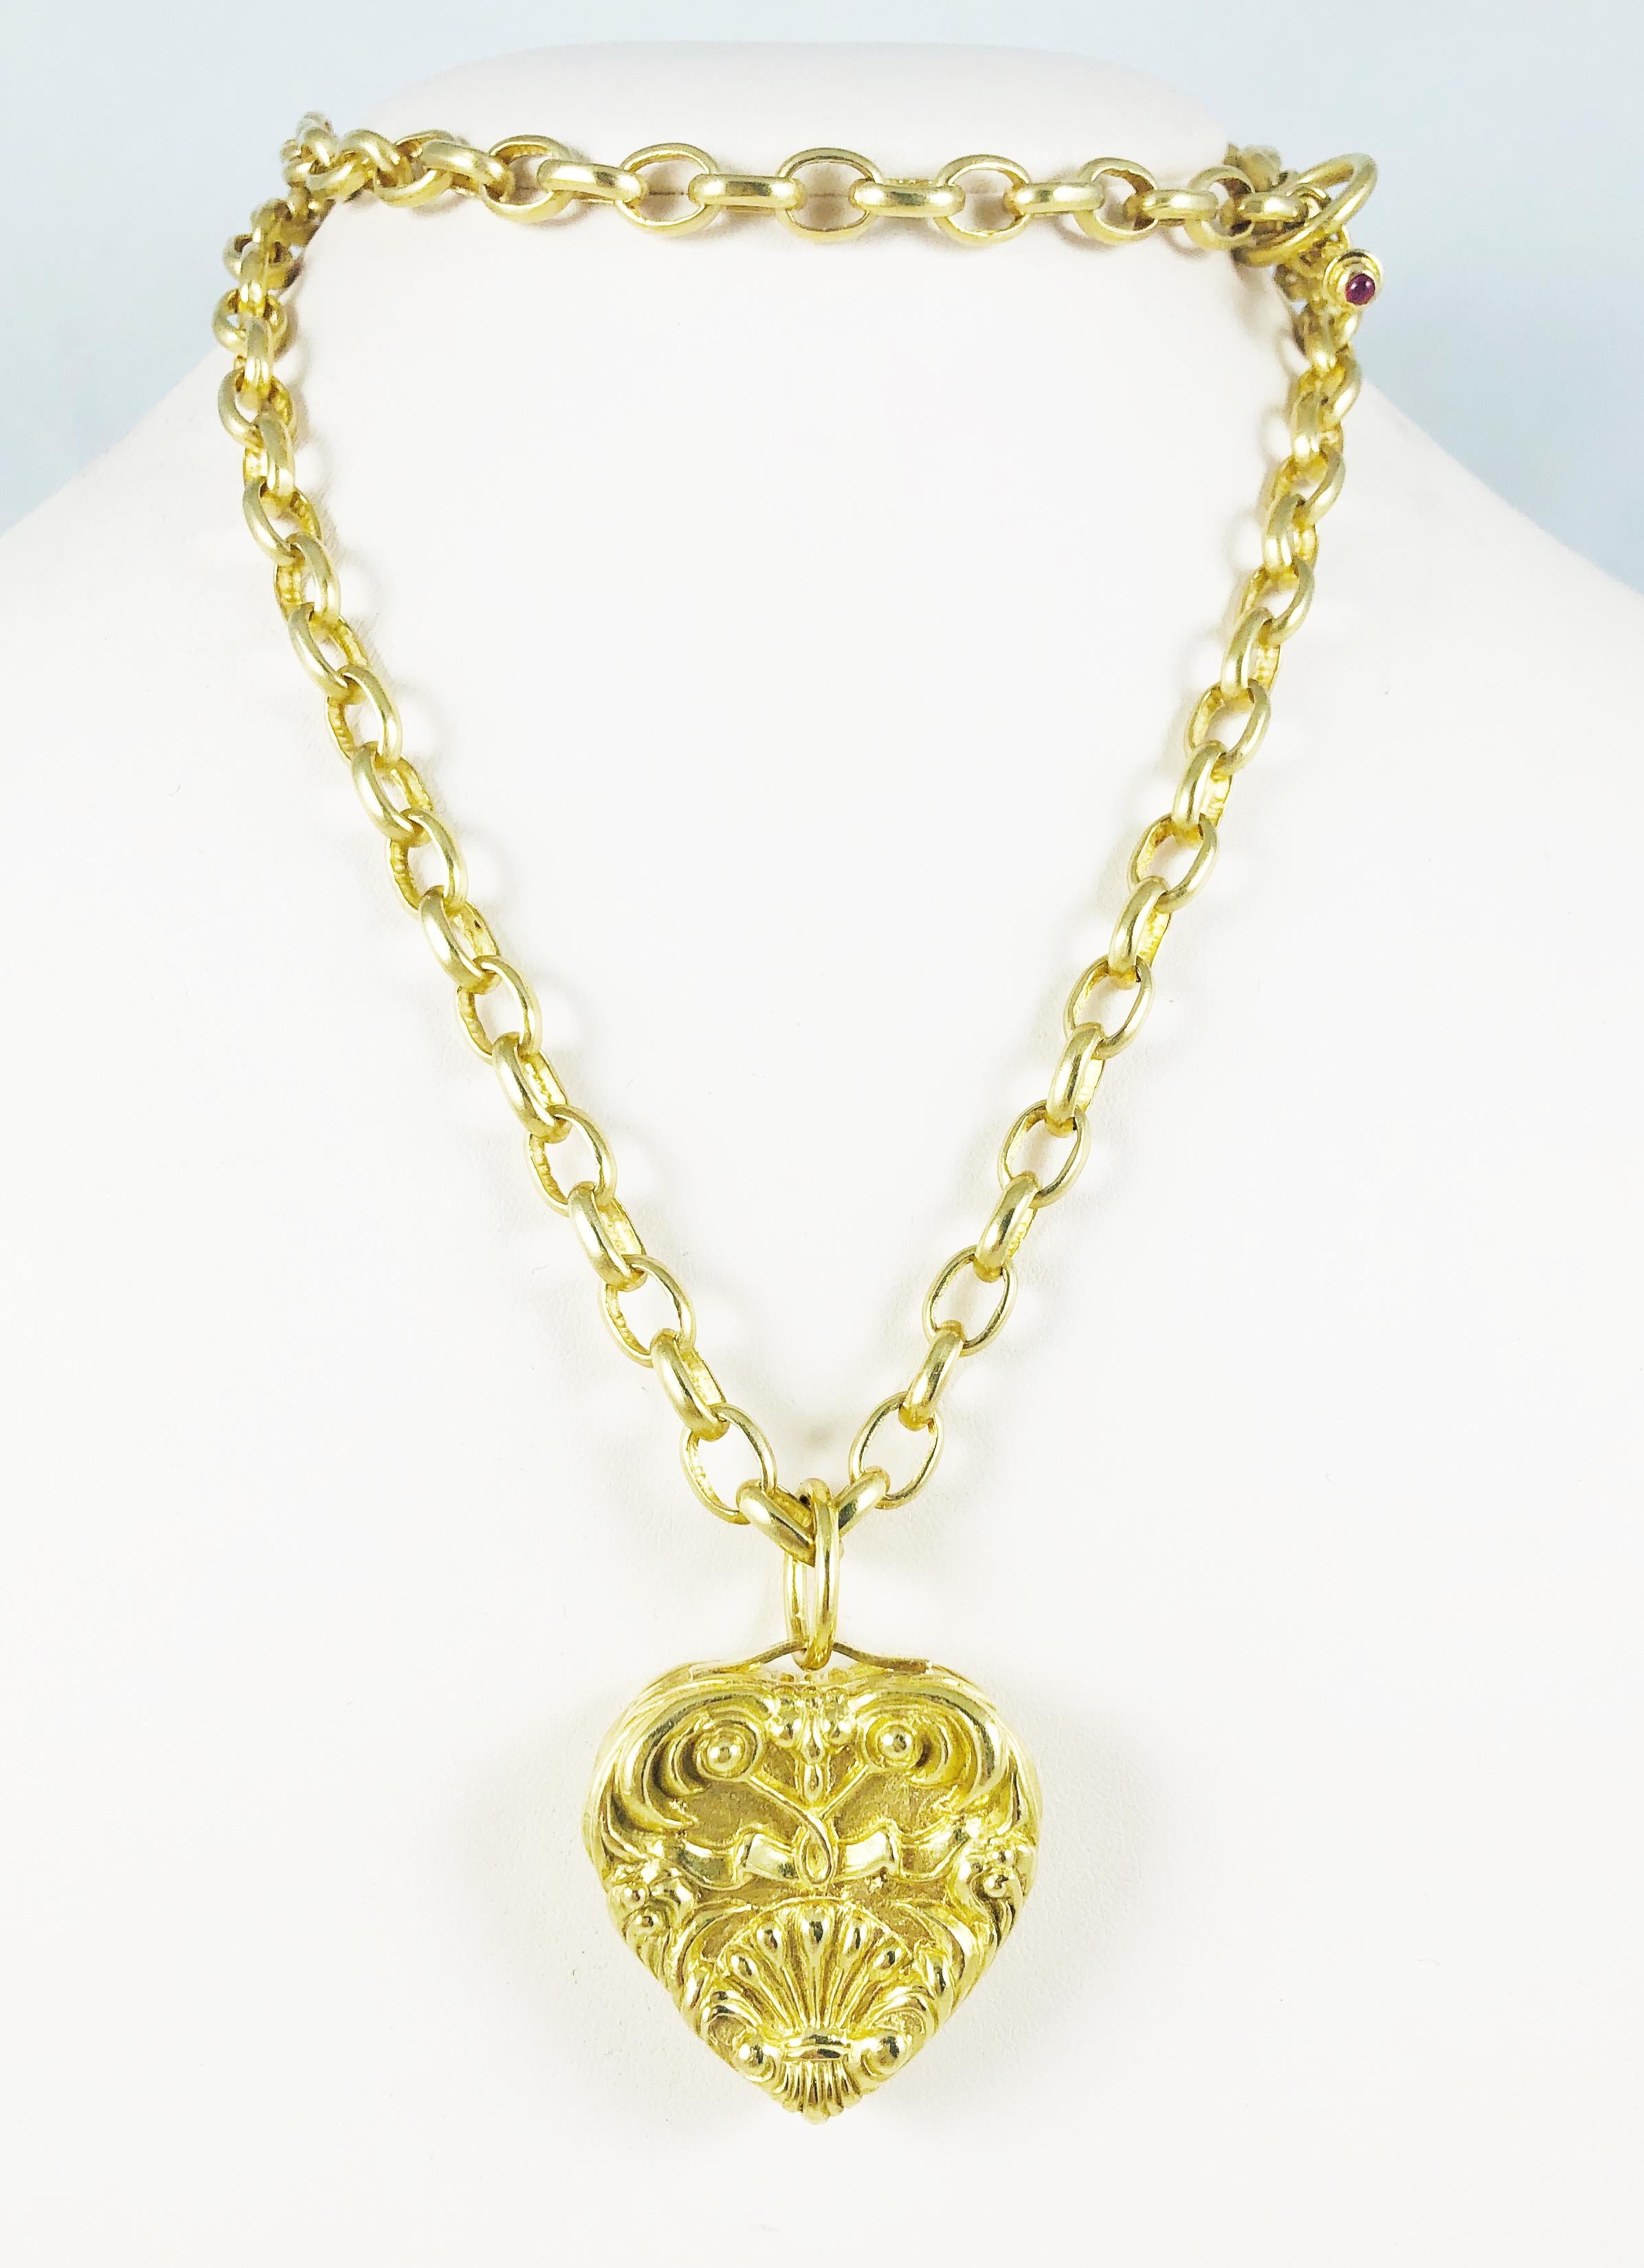 This is a gorgeous designer Marlene Stowe Piece! Made in 18 K Yellow Gold, this piece features a beautifully carved heart Pendant that measures 1.5 inches by 1.25 inches. The heart is removable so this piece can be worn in four ways!: A single, 30